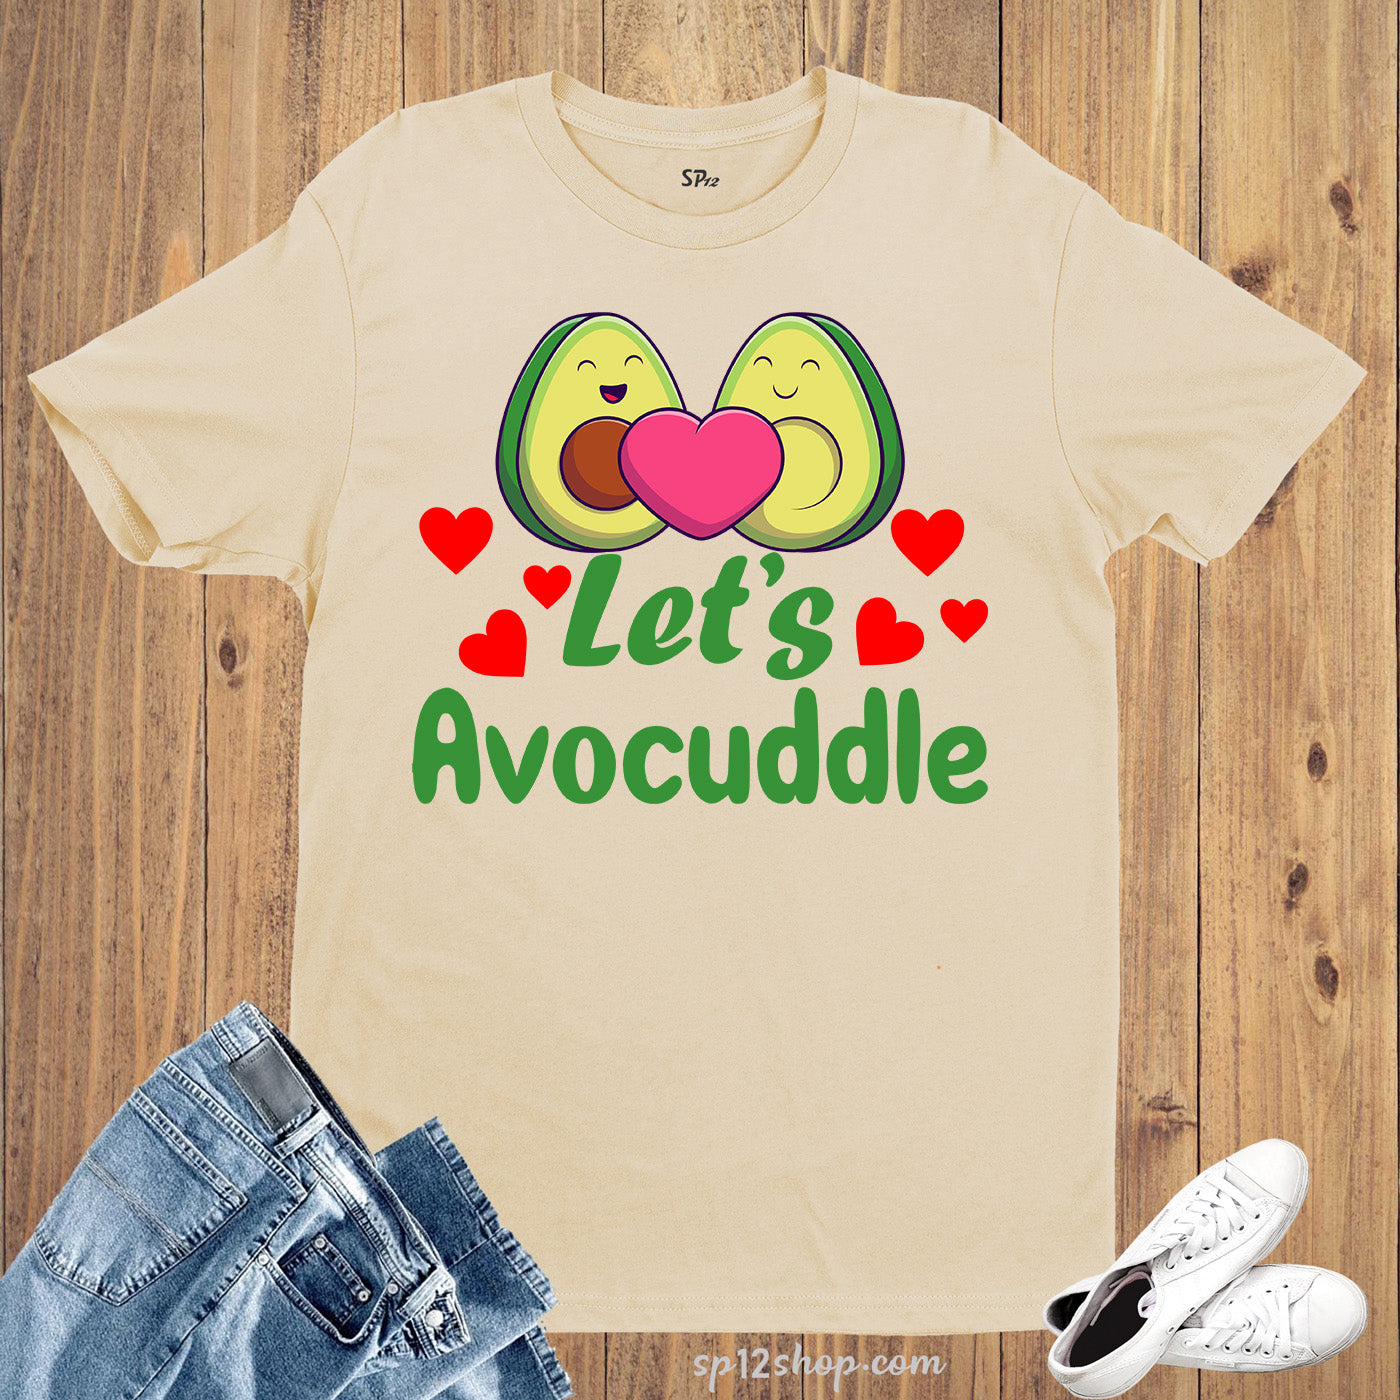 Let's Avocuddle Valentine T Shirts for Couples